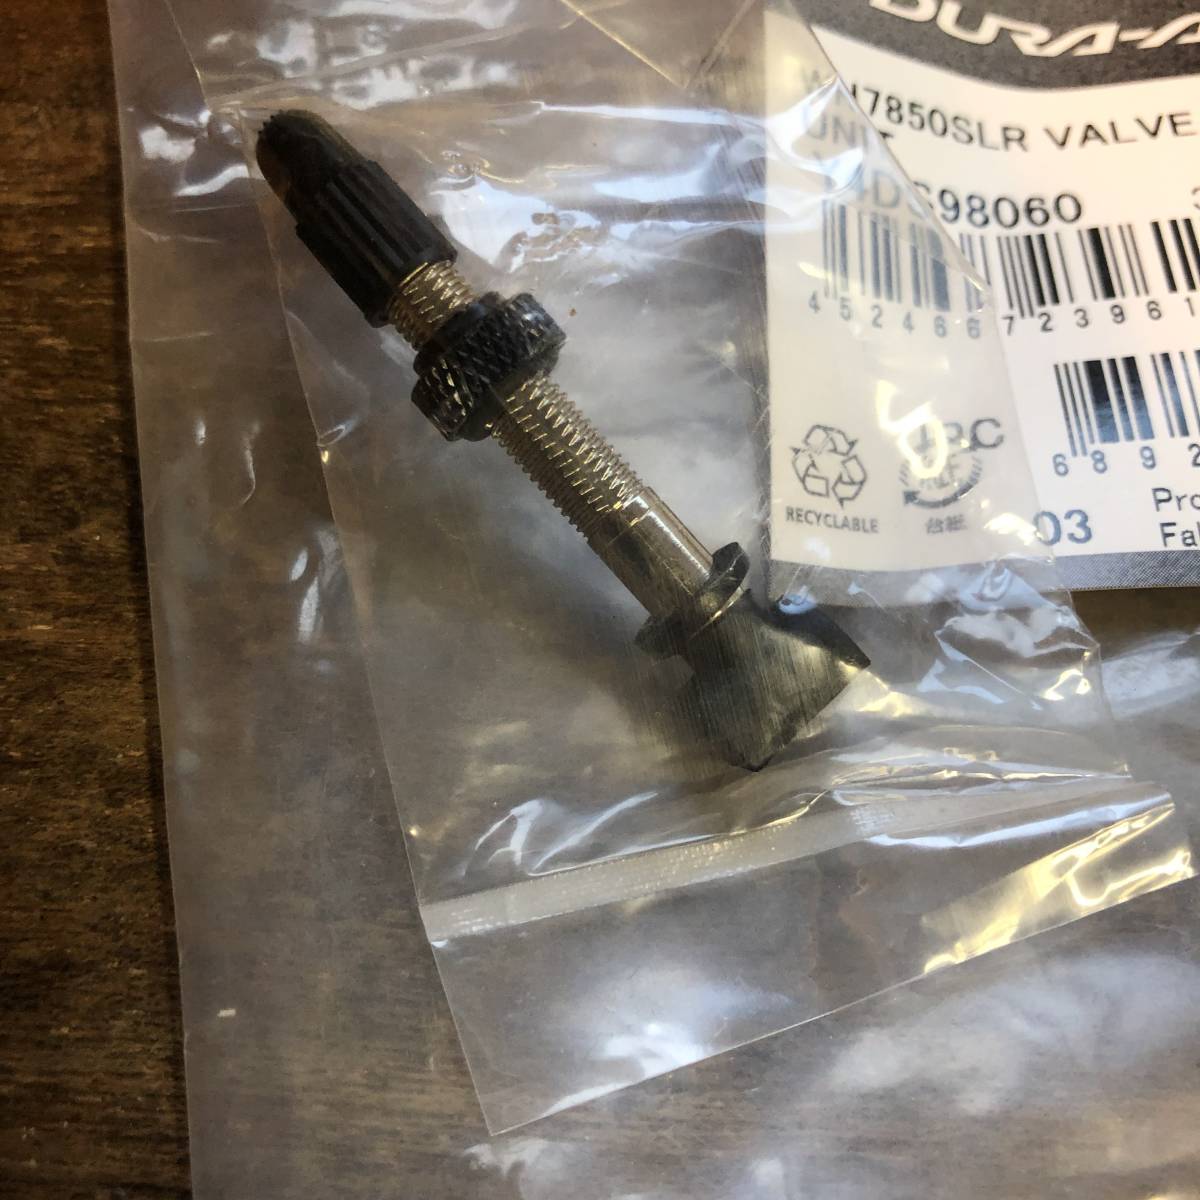 SHIMANO / DURAACE WH7850 SLR VALVE UNIT NEW OLD STOCKの画像2